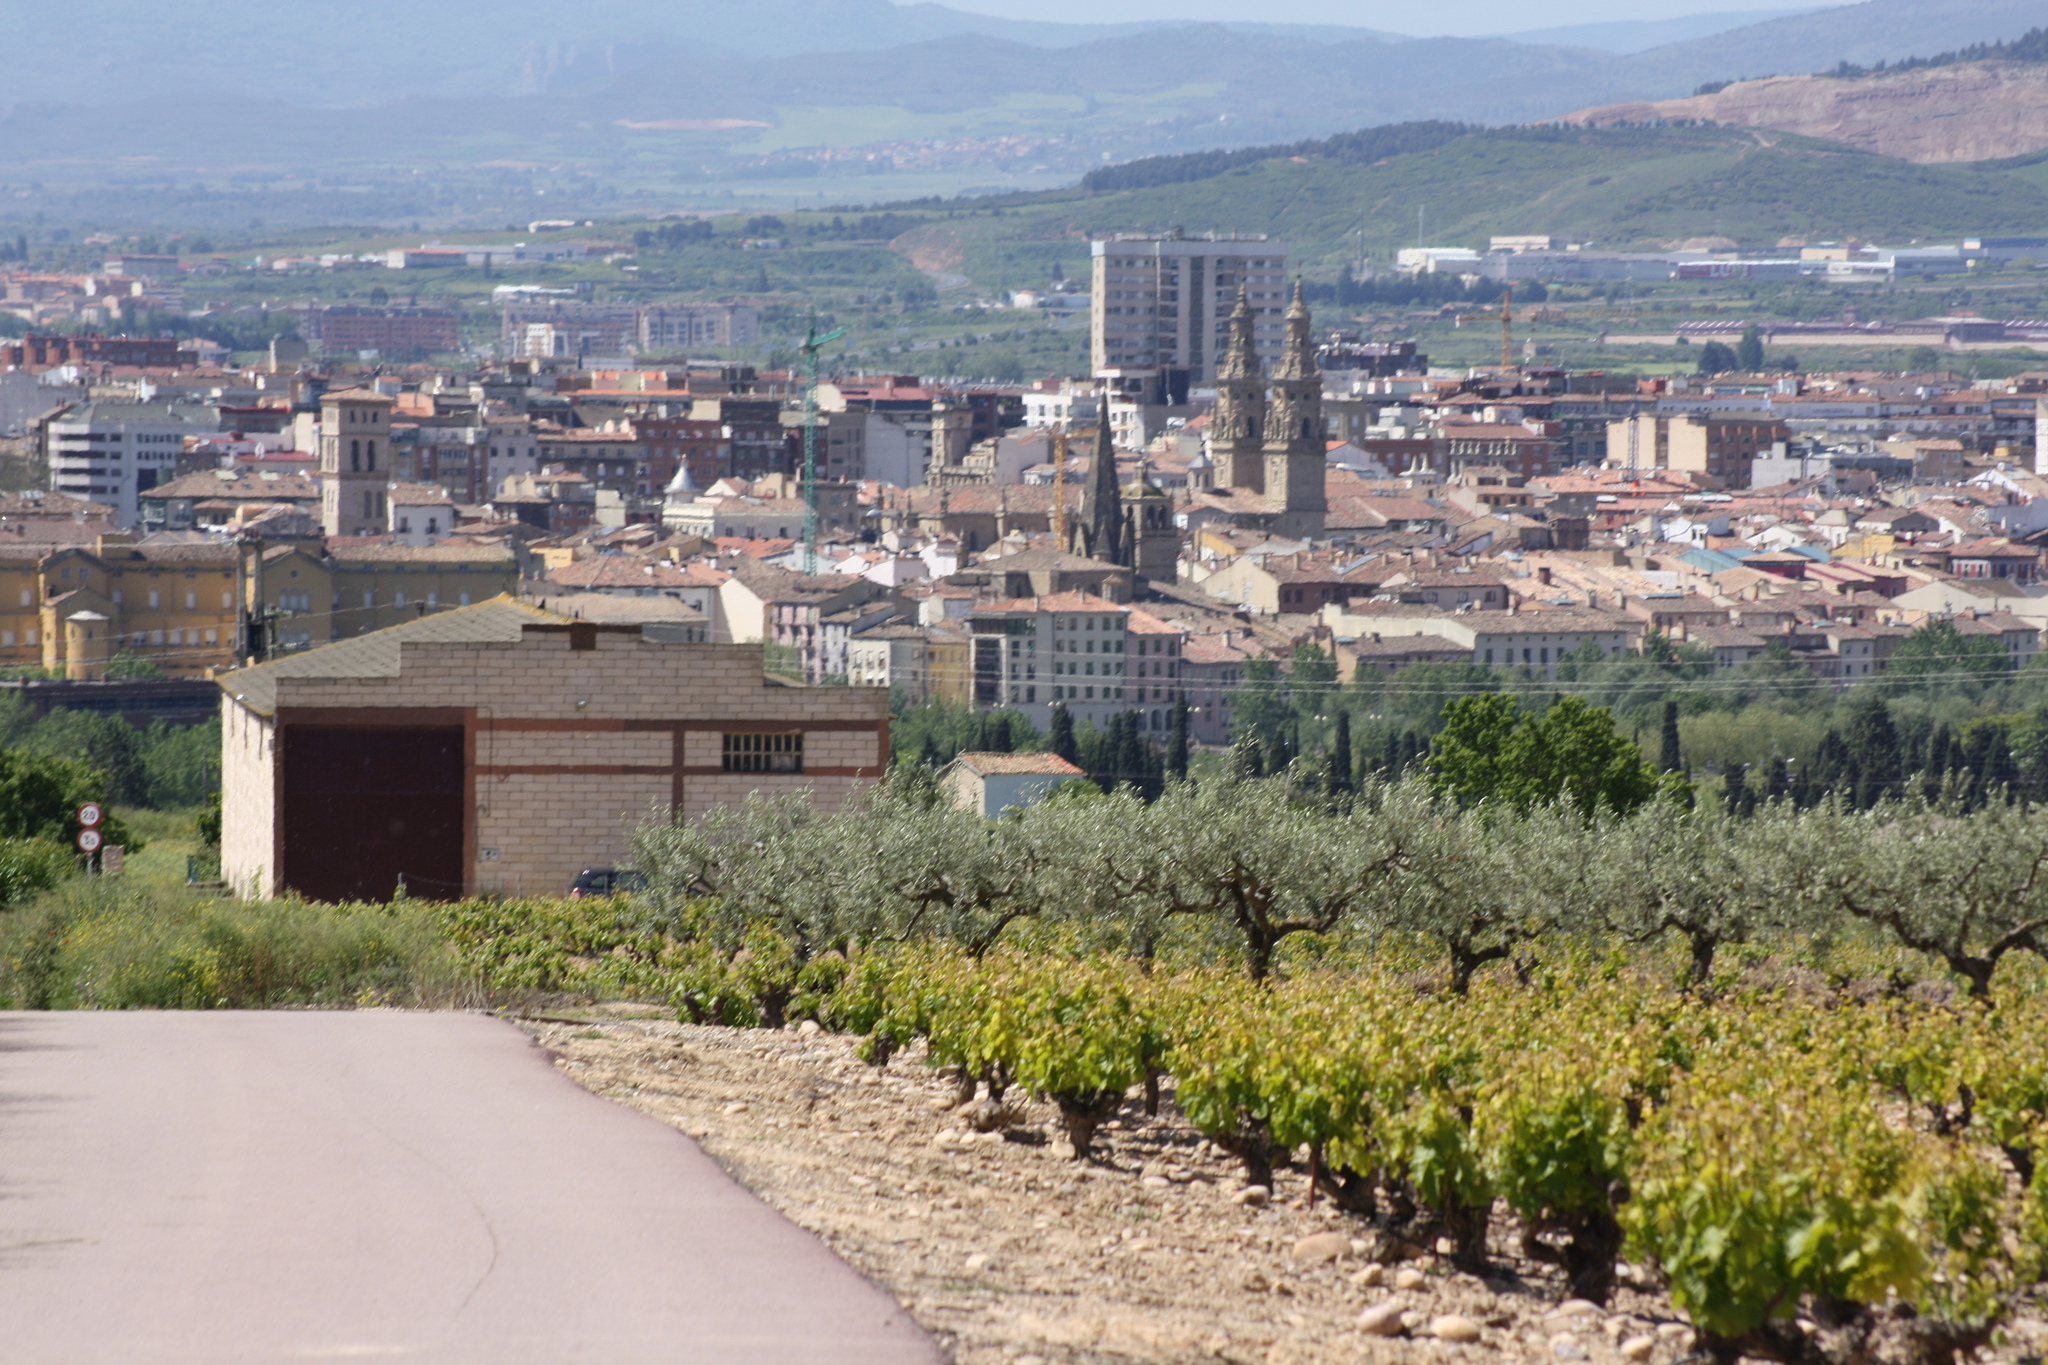 Road at the entrace to Logroño with the city in the background